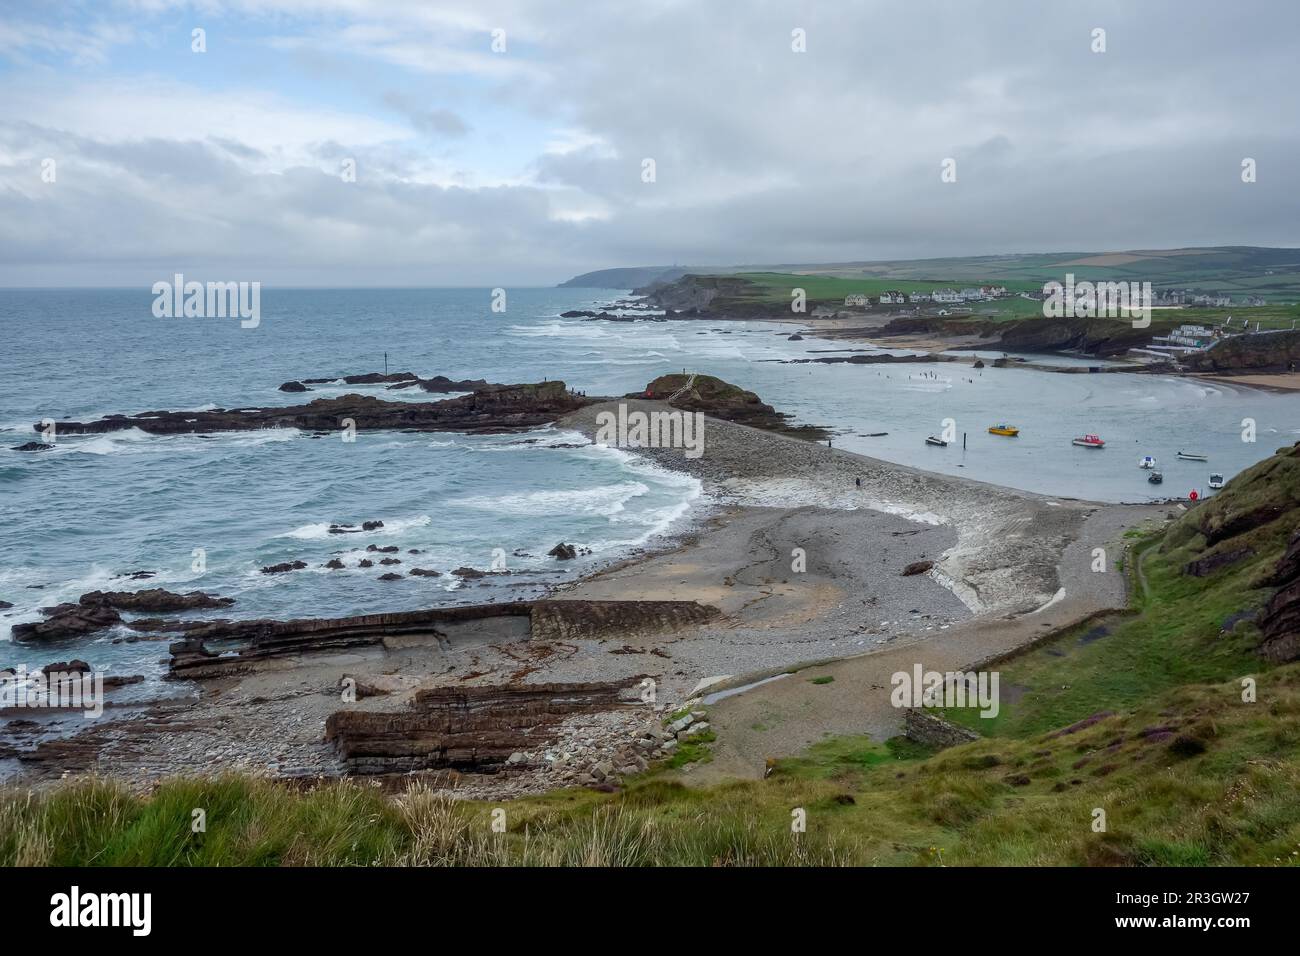 BUDE, CORNWALL/UK - AUGUST 15 : Scenic view of the Bude coastline in Cornwall on August 15, 2013 Stock Photo